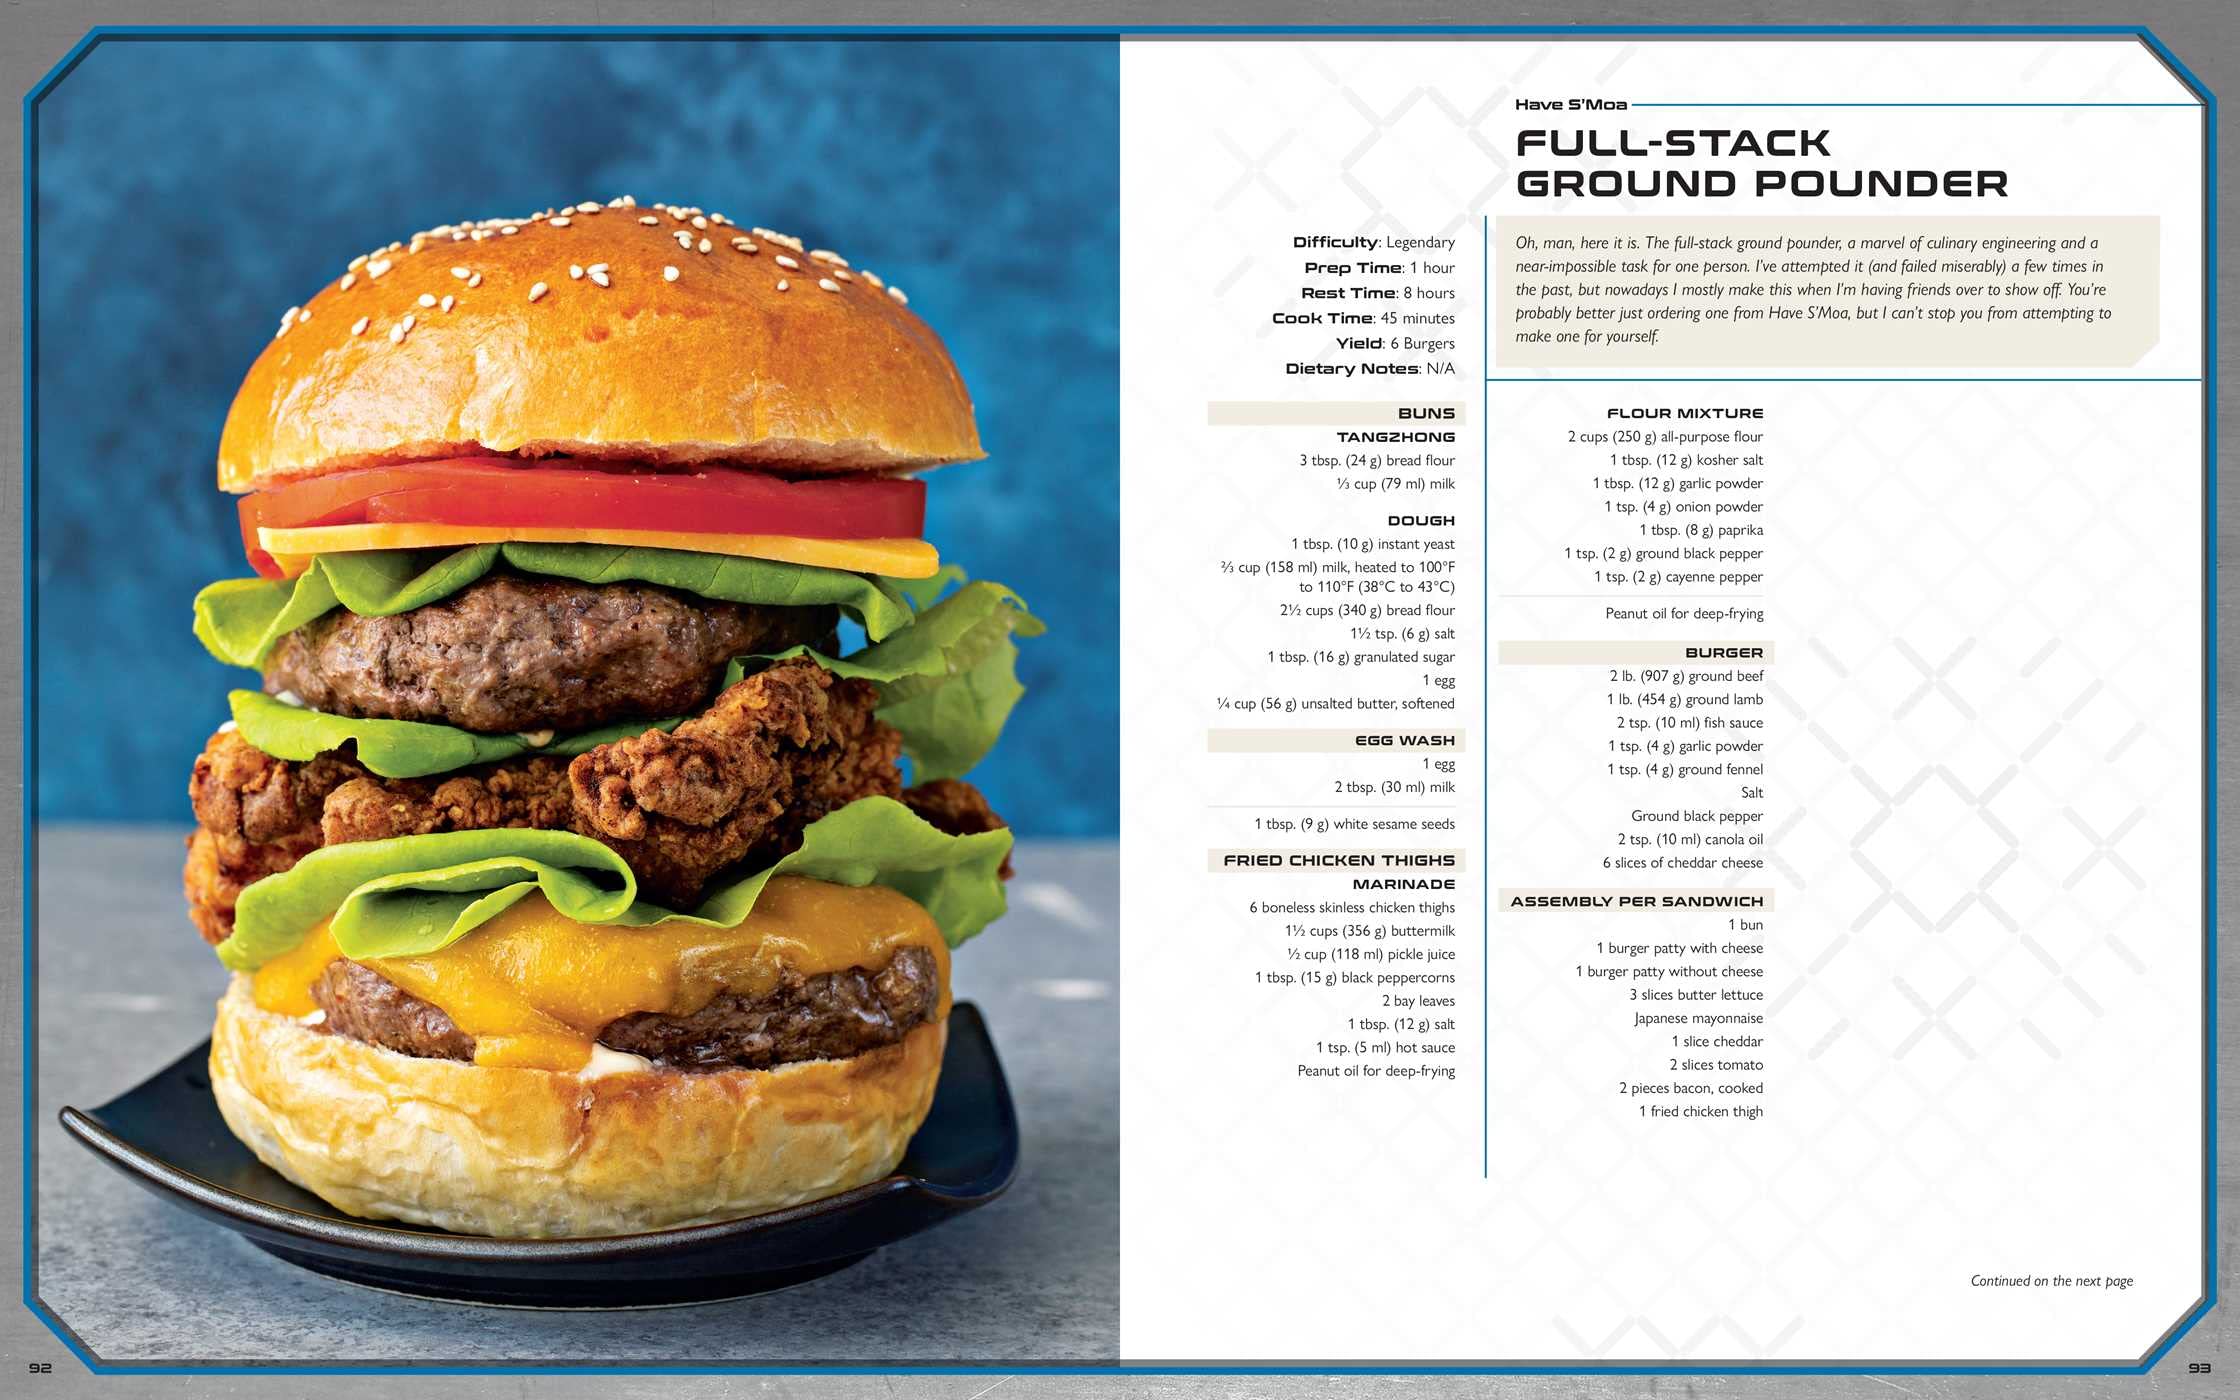 Halo: The Official Cookbook recipe preview for full-stack ground pounder